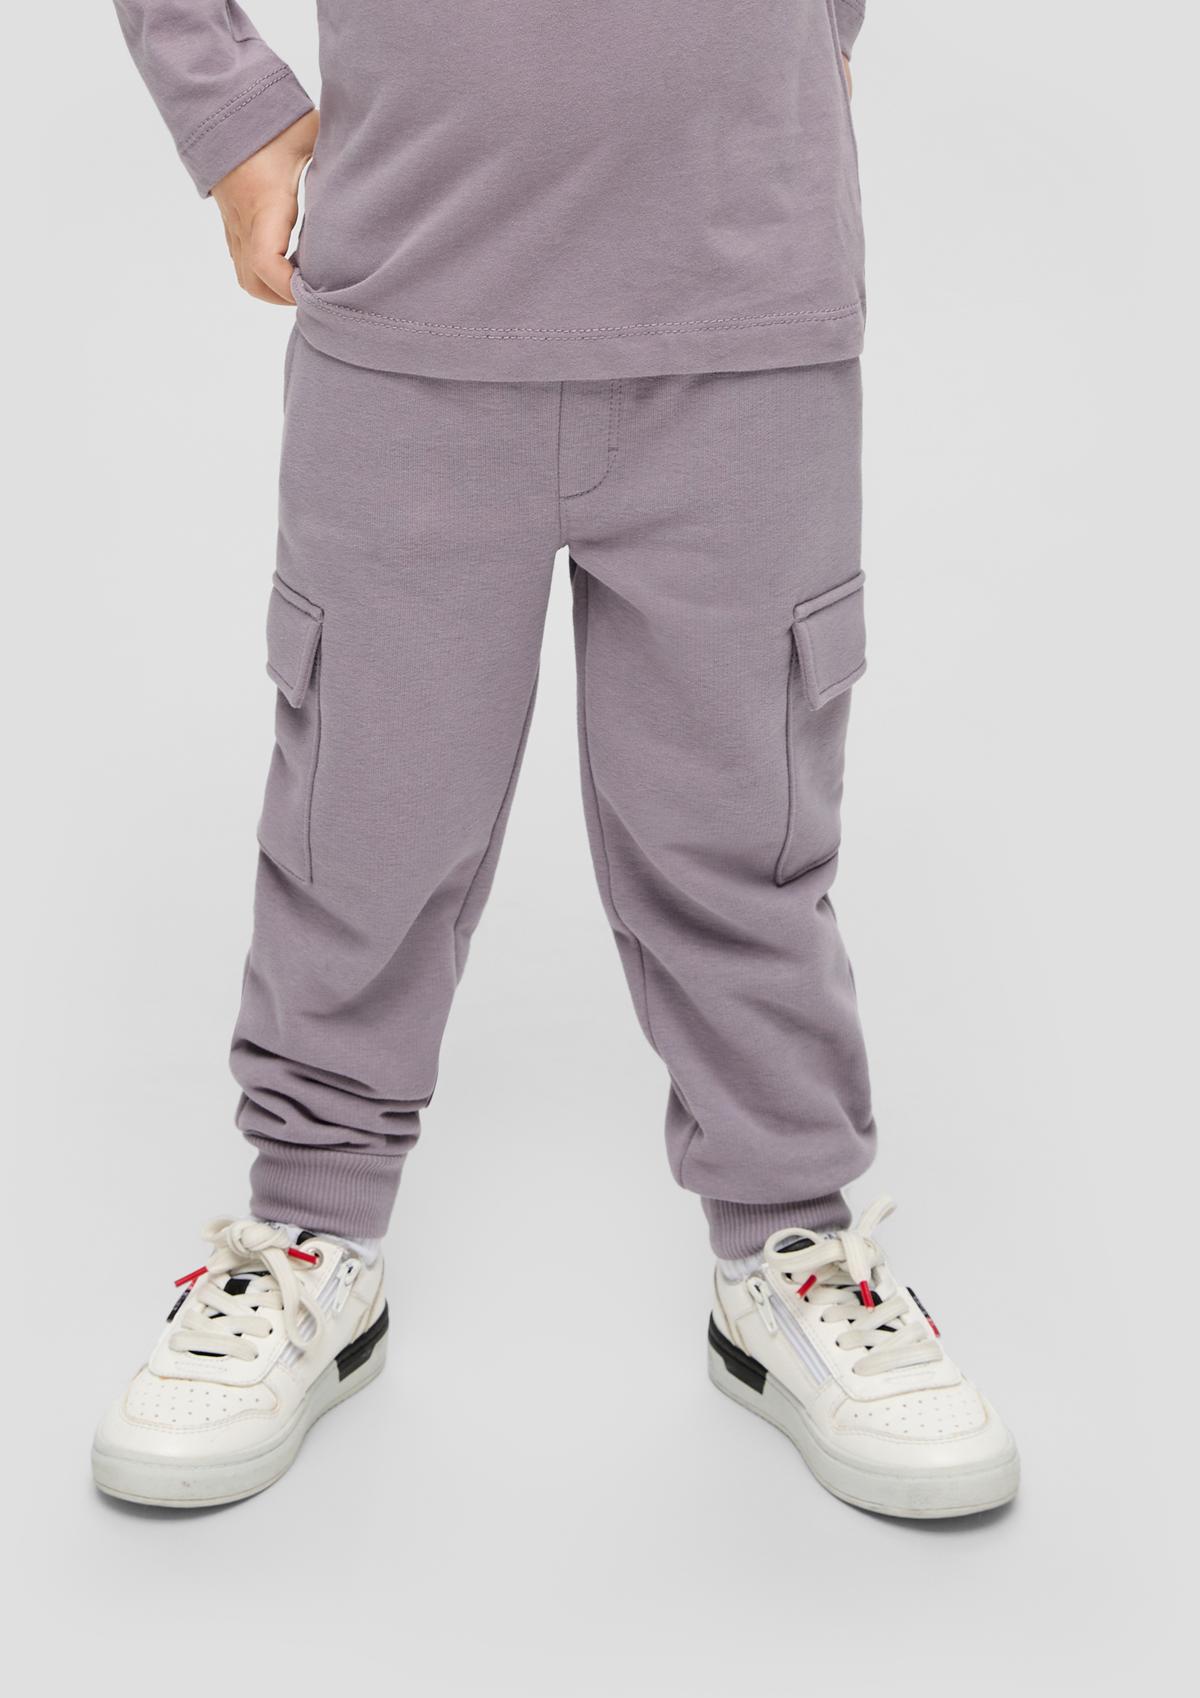 Leggings with cargo pockets